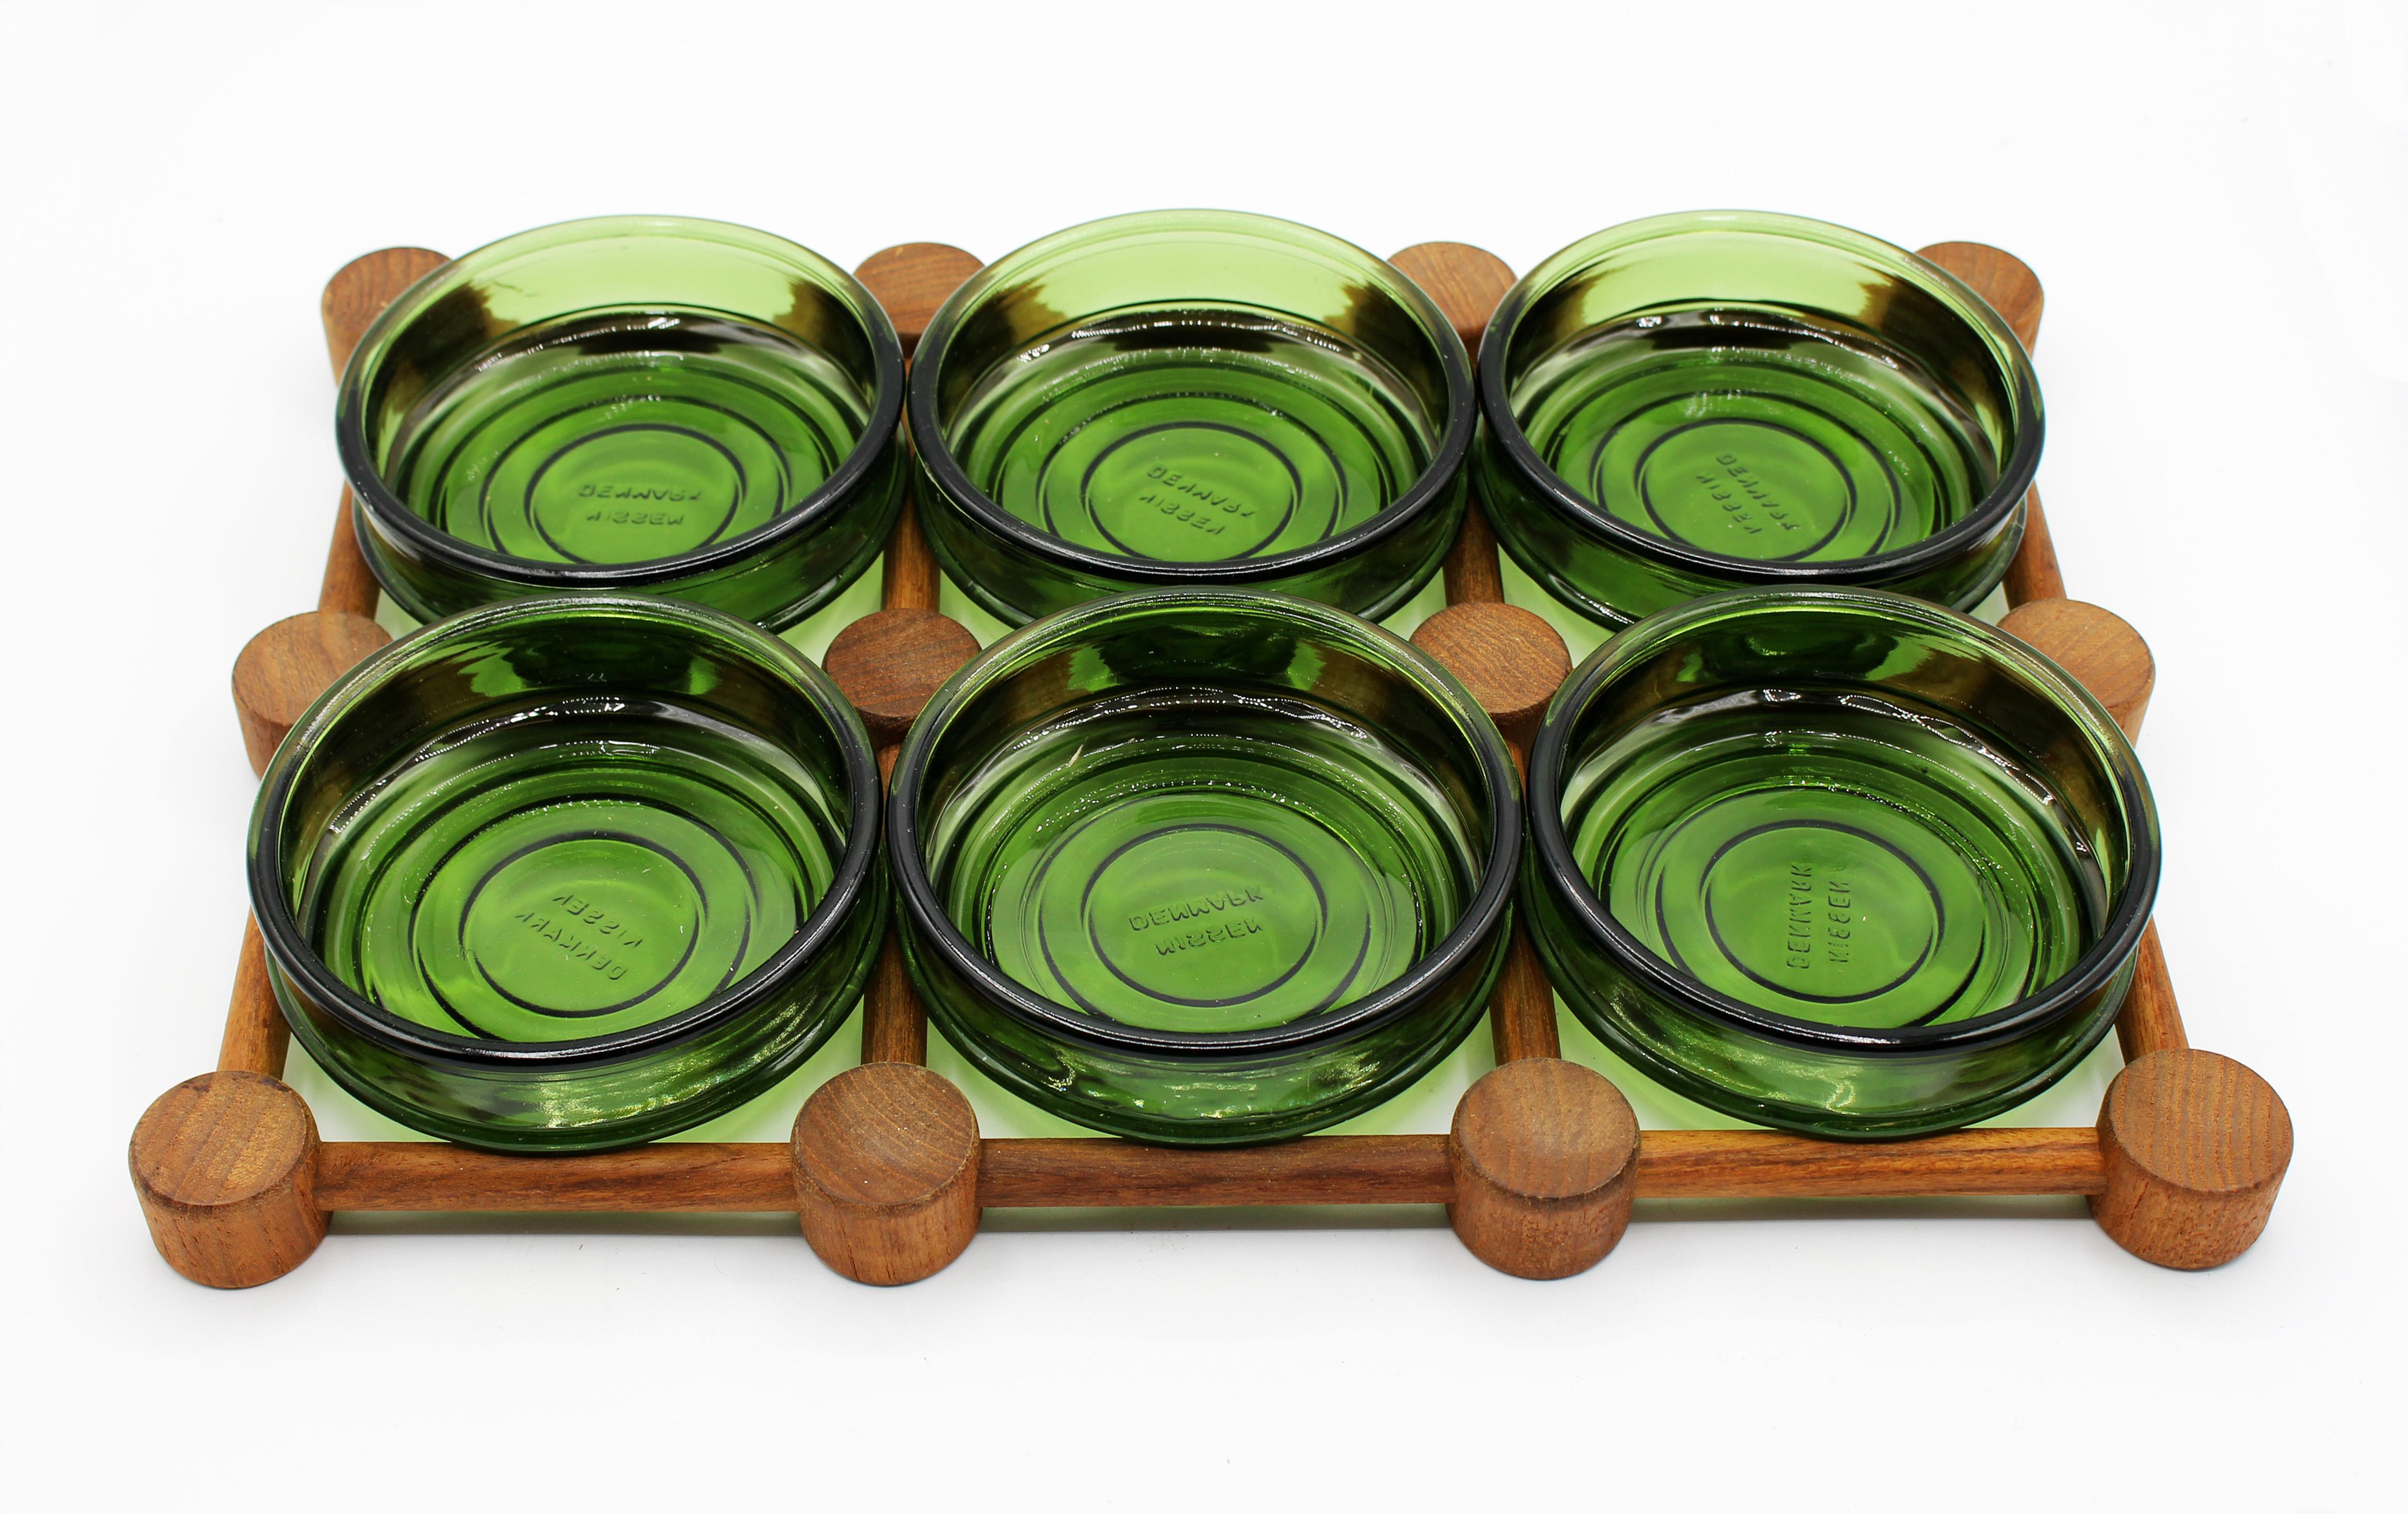 Circa 1970s Nissen cabaret set, Mid-Century Modern. Teak tray with 6 green signed glass serving bowls.

Measures: 15 1/8